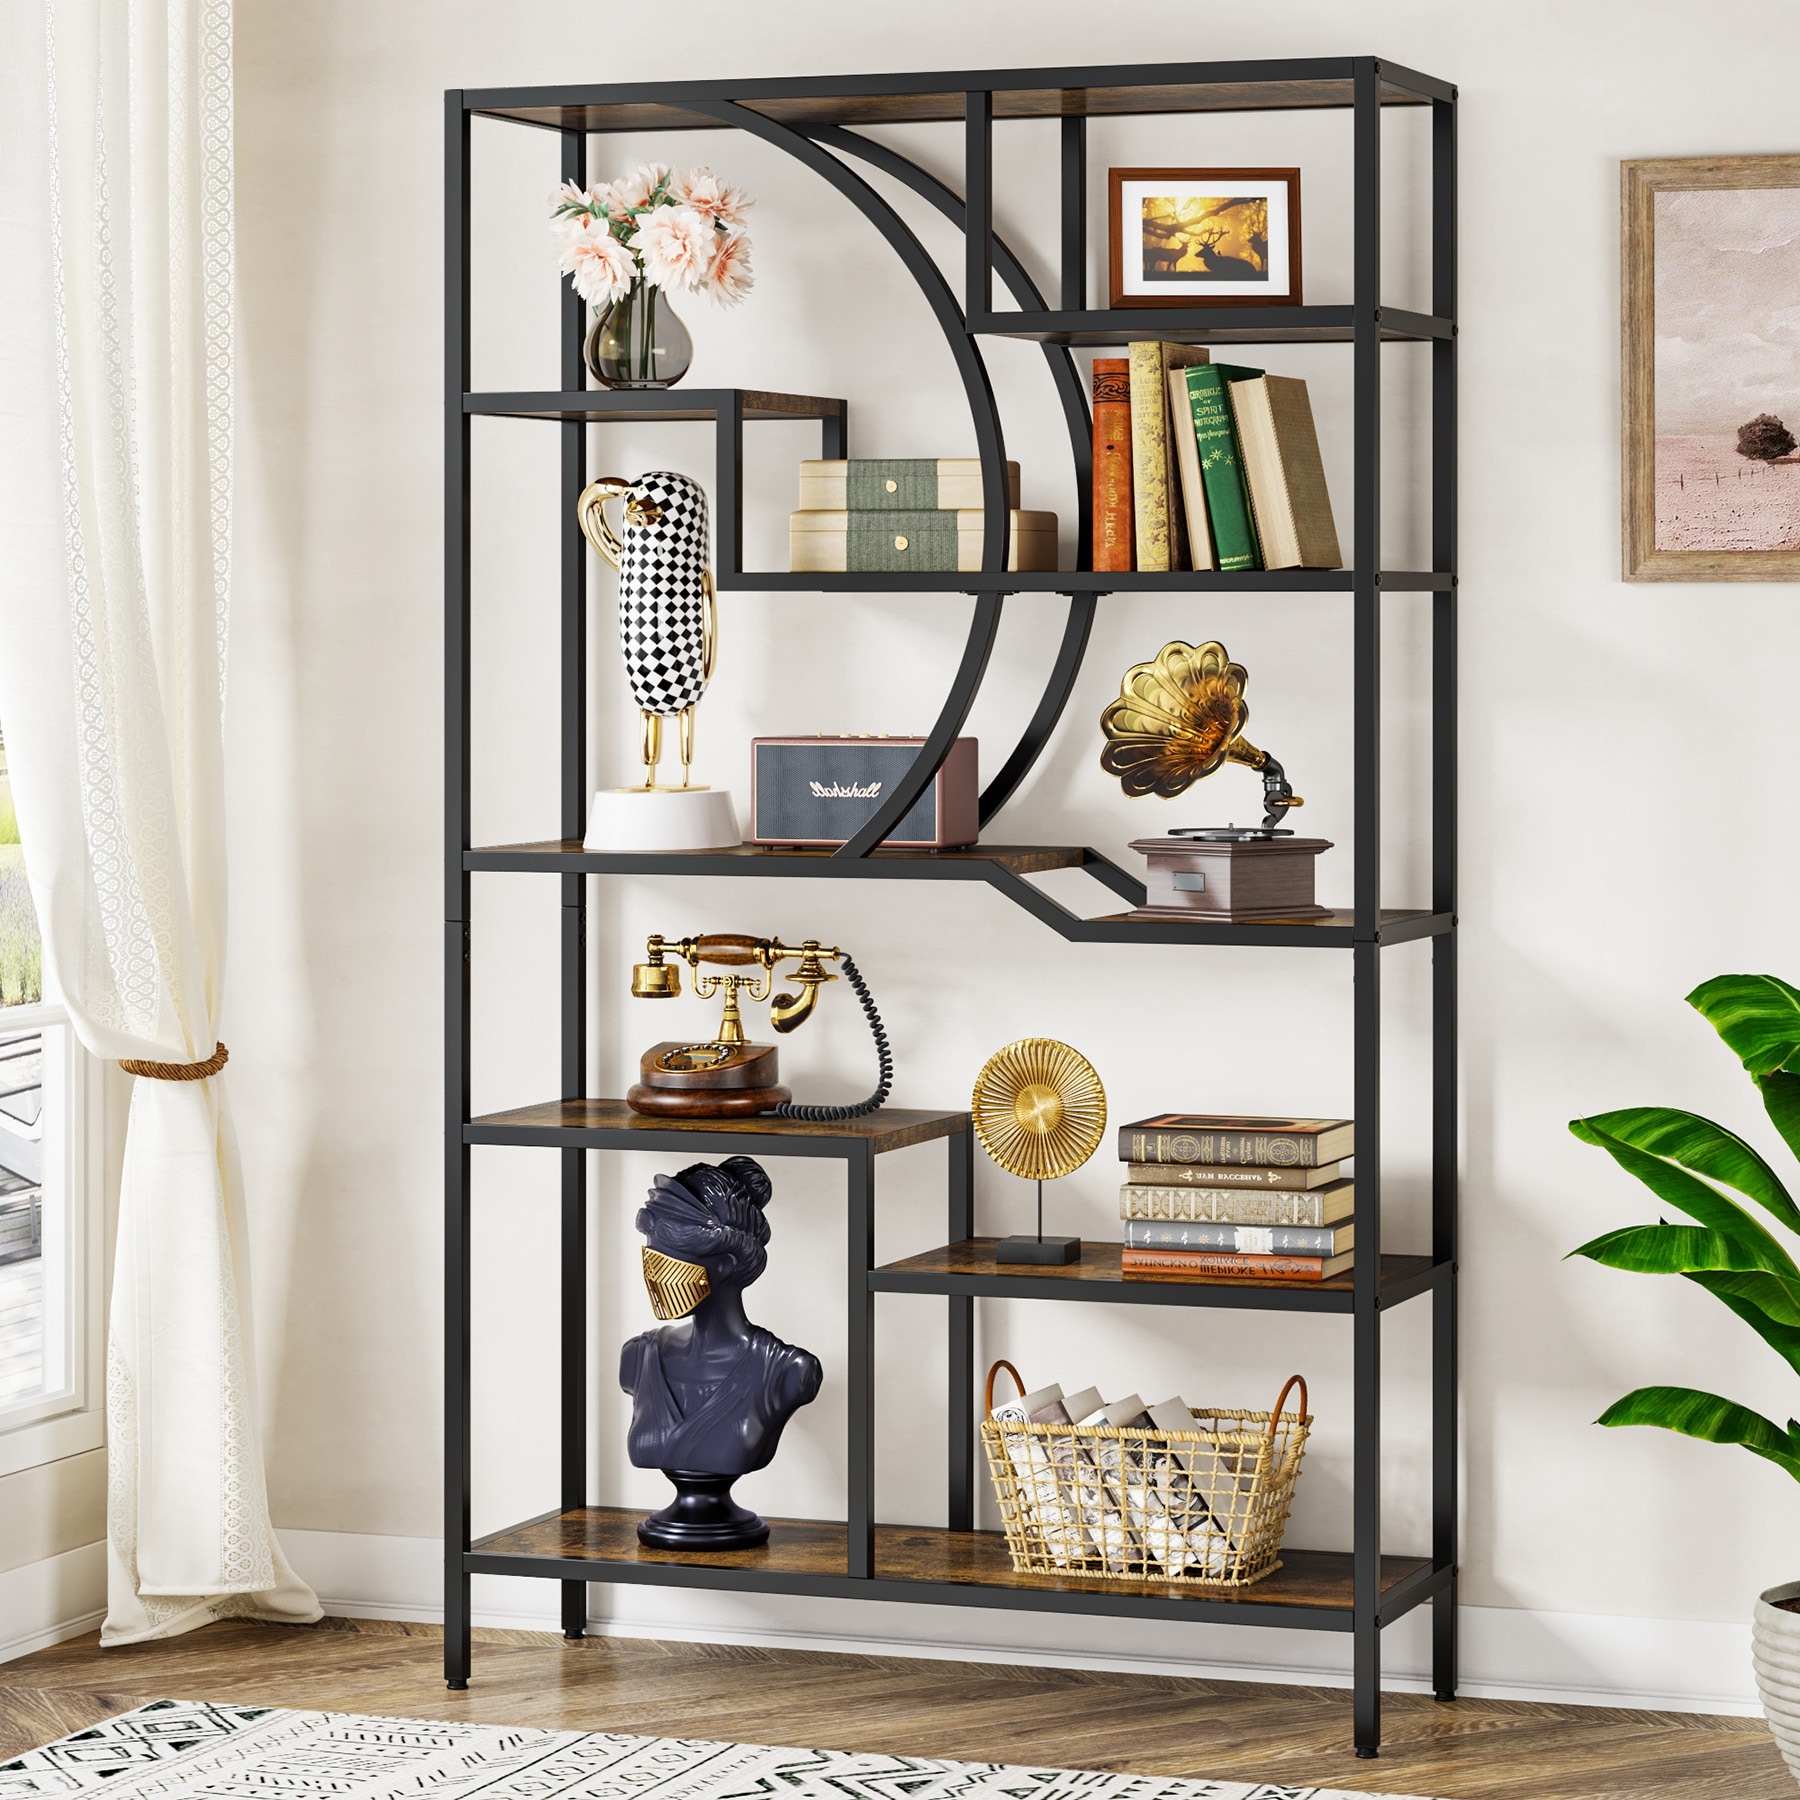 https://ak1.ostkcdn.com/images/products/is/images/direct/cea1b2b9232d1318e3f5c836c3d1ef2fa241cd3c/69-Inch-Industrial-Etagere-Bookcase%2C-9-Tier-Bookshelf.jpg